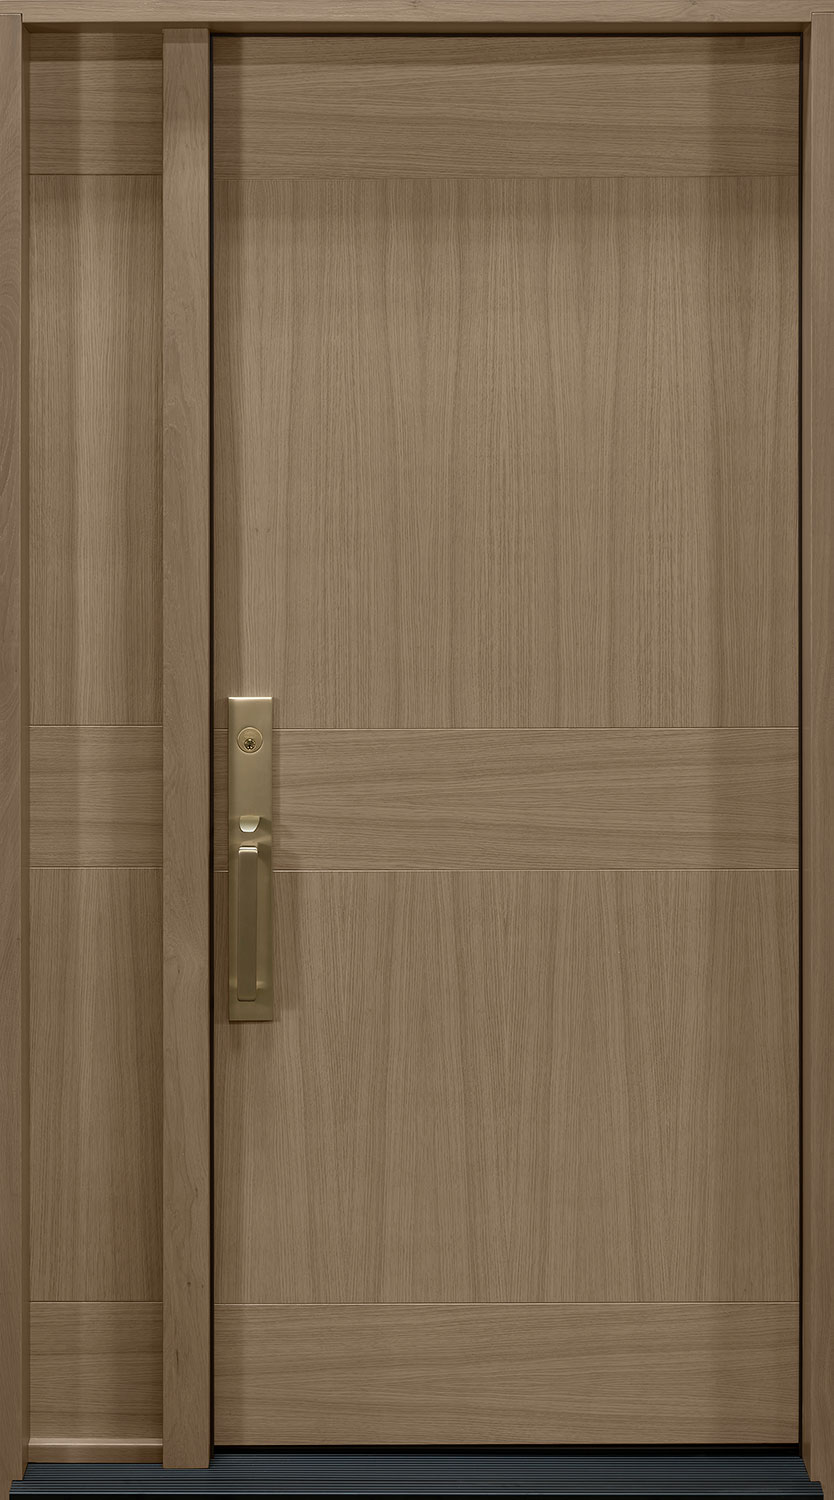 Oak Solid Wood Front Entry Door - Single with 1 Sidelite